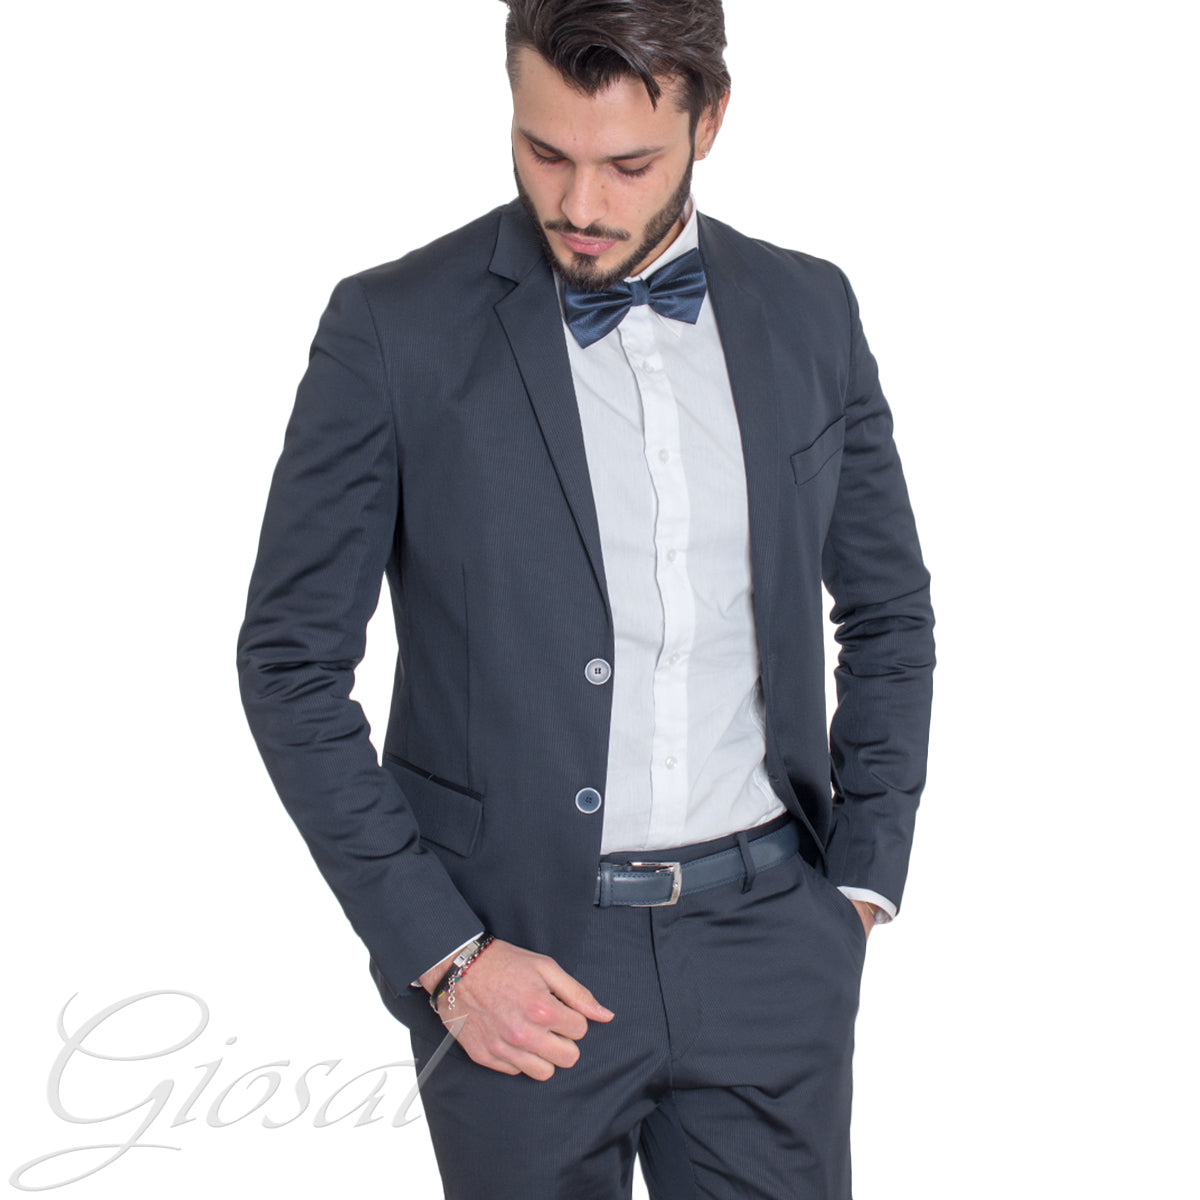 Men's Suit Single-breasted Suit Jacket Trousers Blue Striped Elegant Ceremony GIOSAL-AE1010A